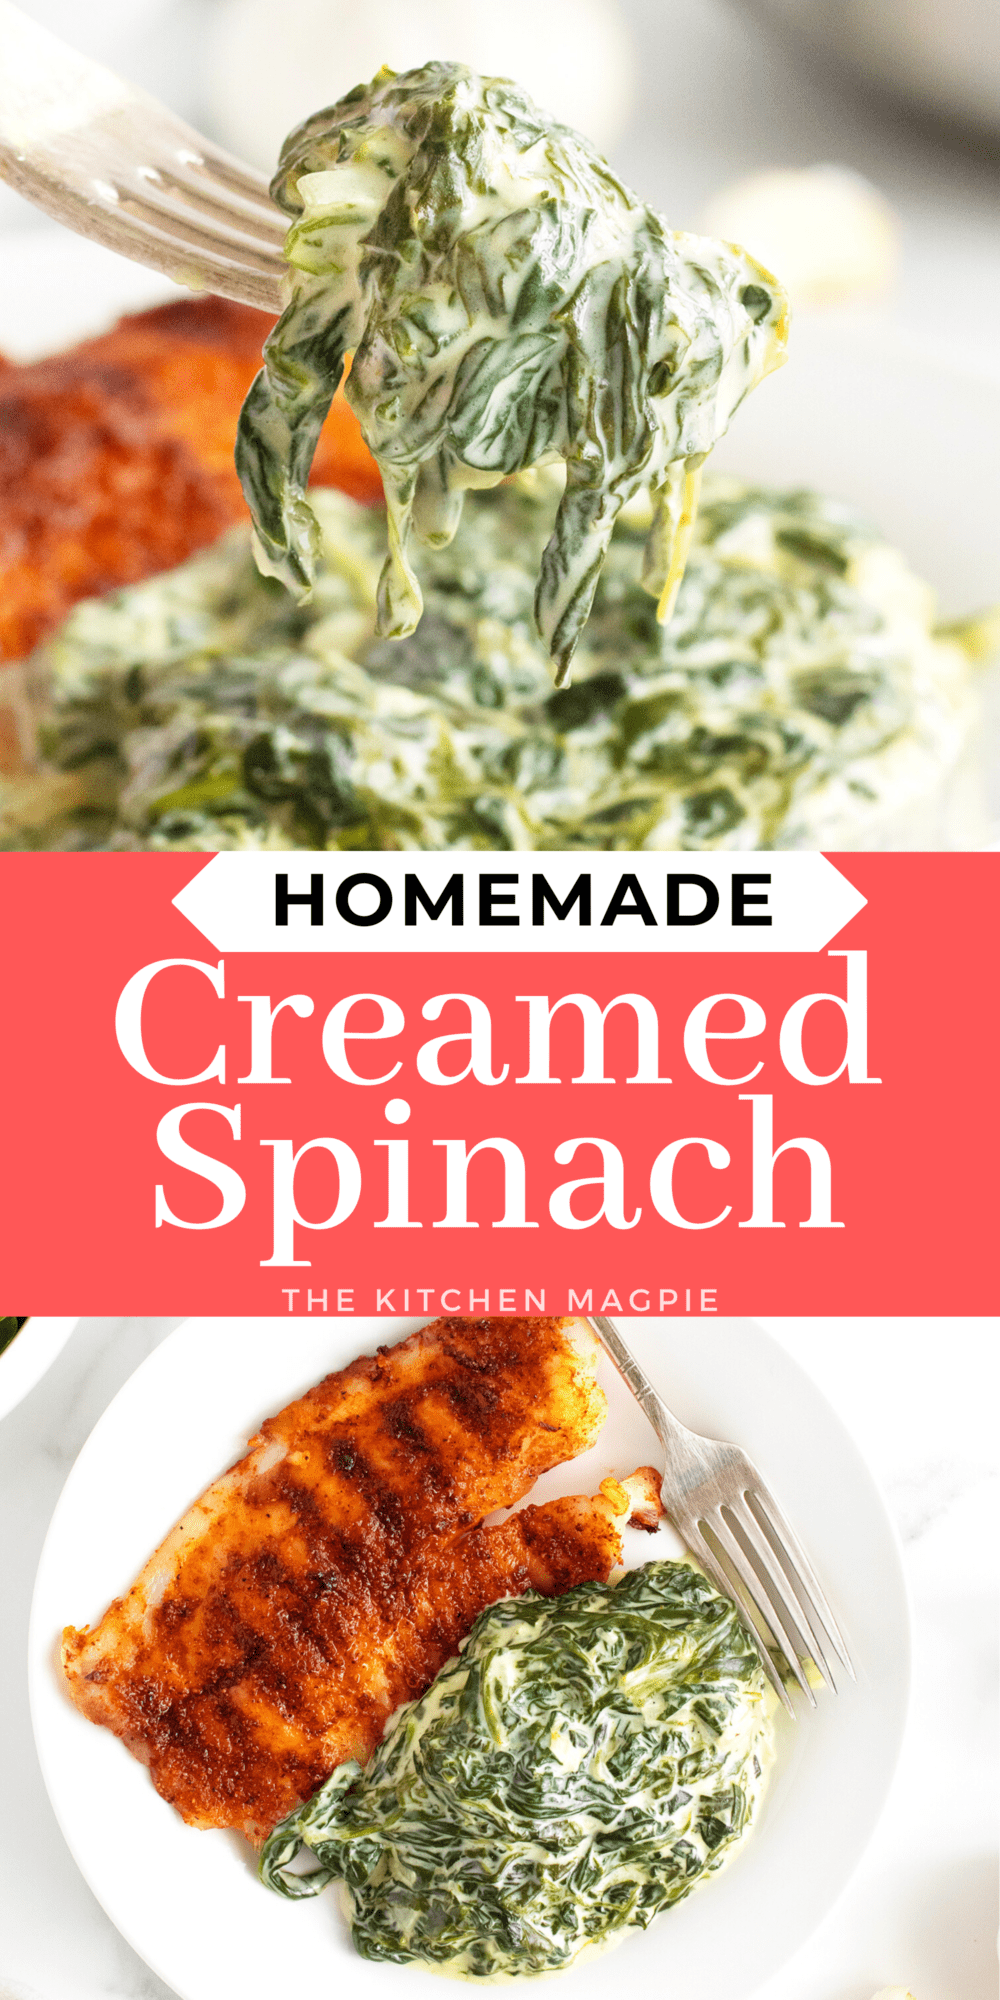 Creamed spinach is one of the most popular side dishes for a reason. Savory, creamy, and yet somehow still super nutritious, you don't just have only to order creamed spinach at steak restaurants, as you can easily make it yourself!